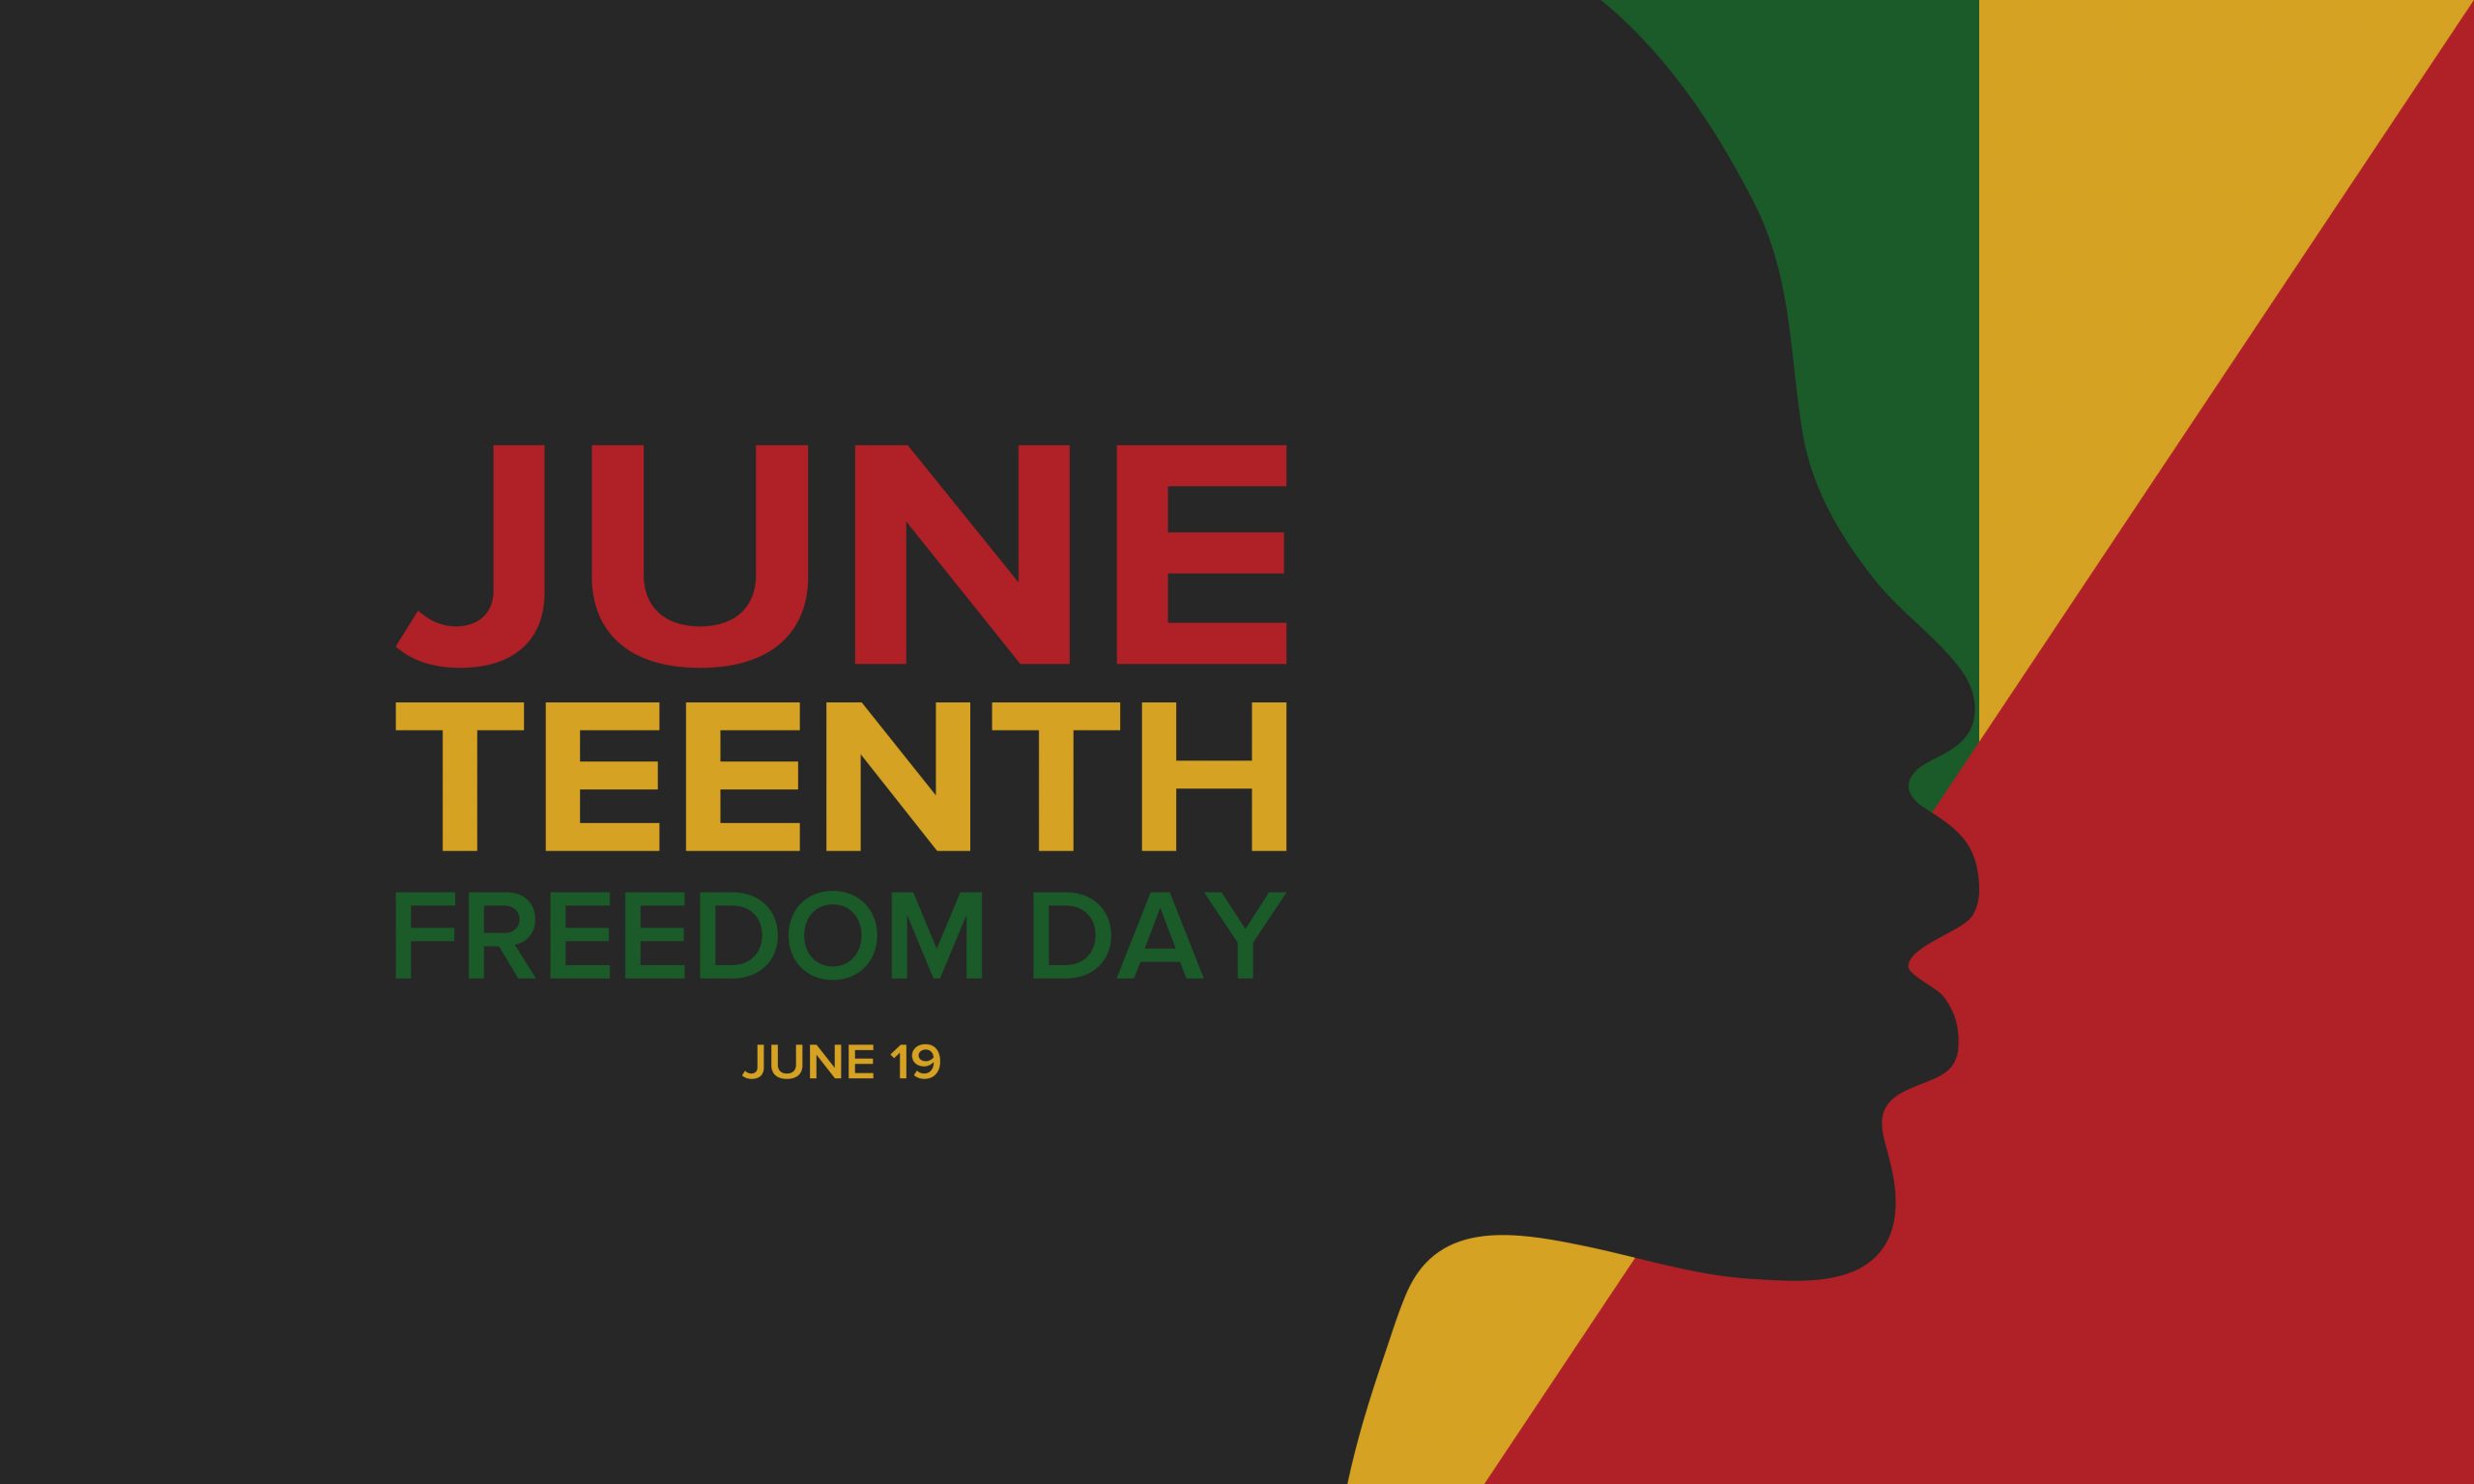 Juneteenth Independence day 